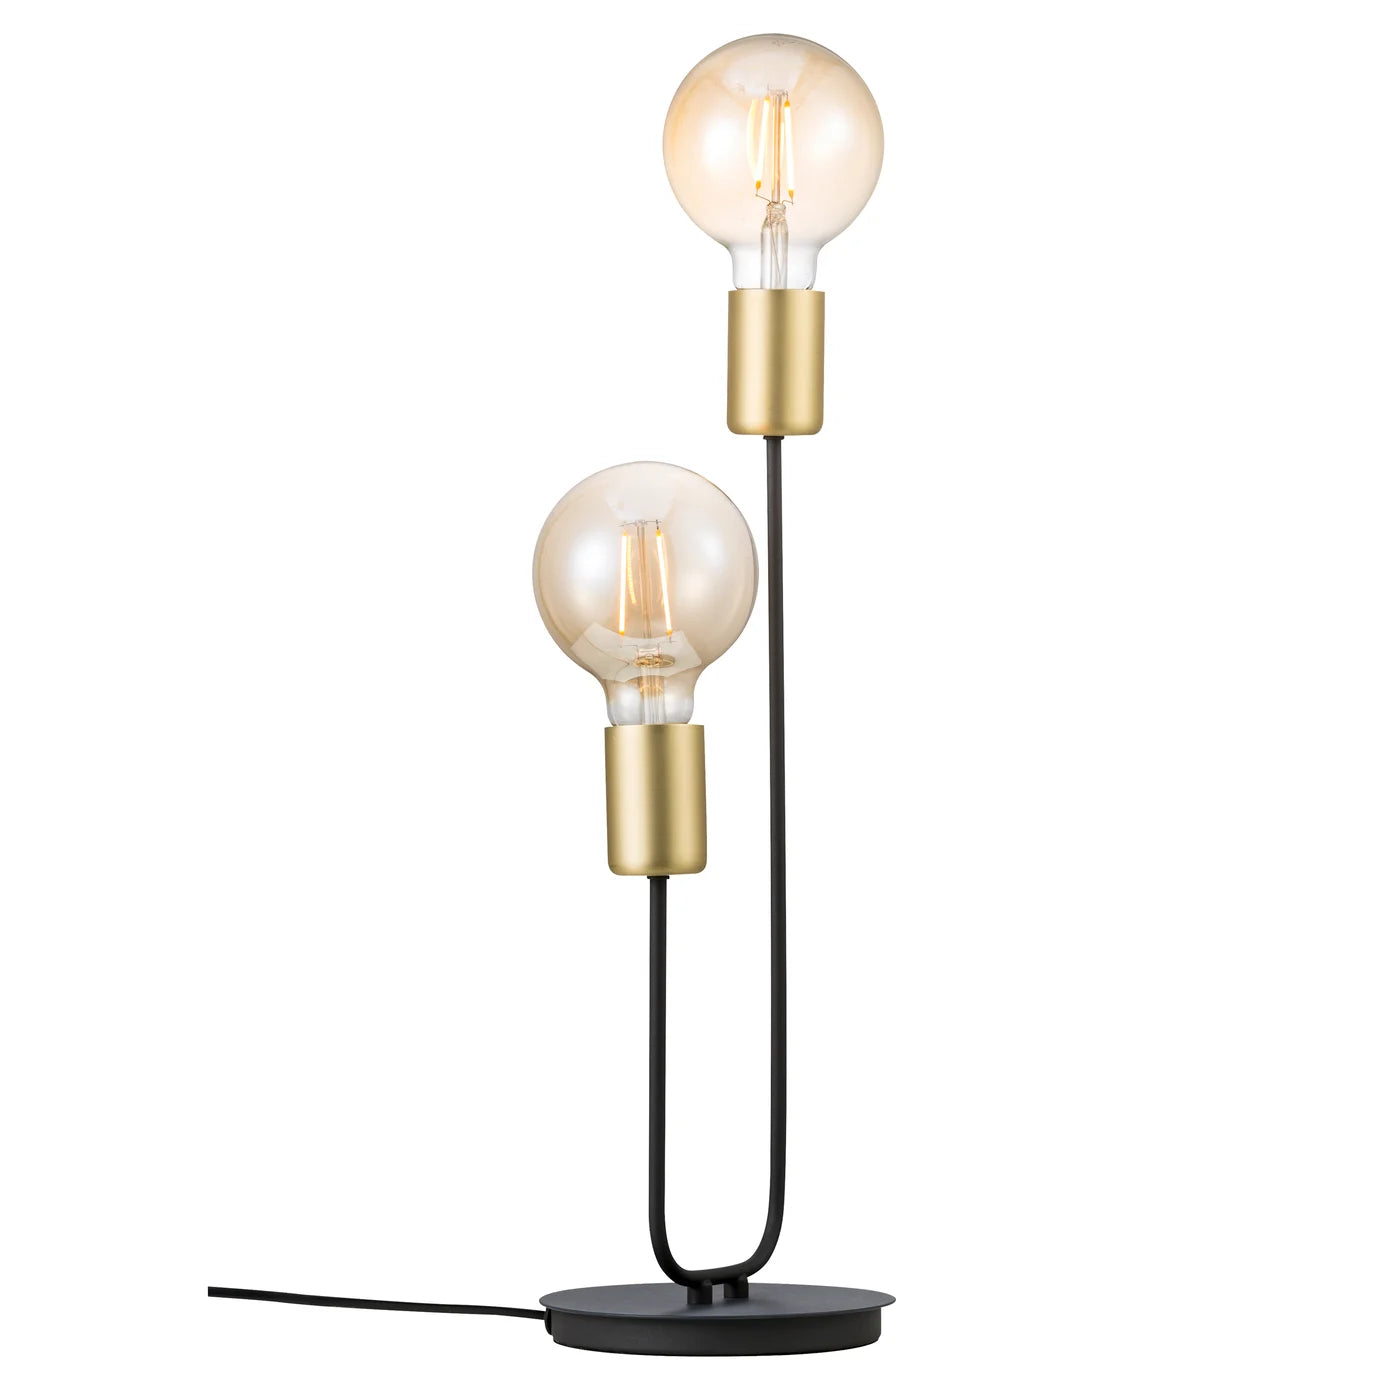 JOSEFINE Table lamp black with gold details